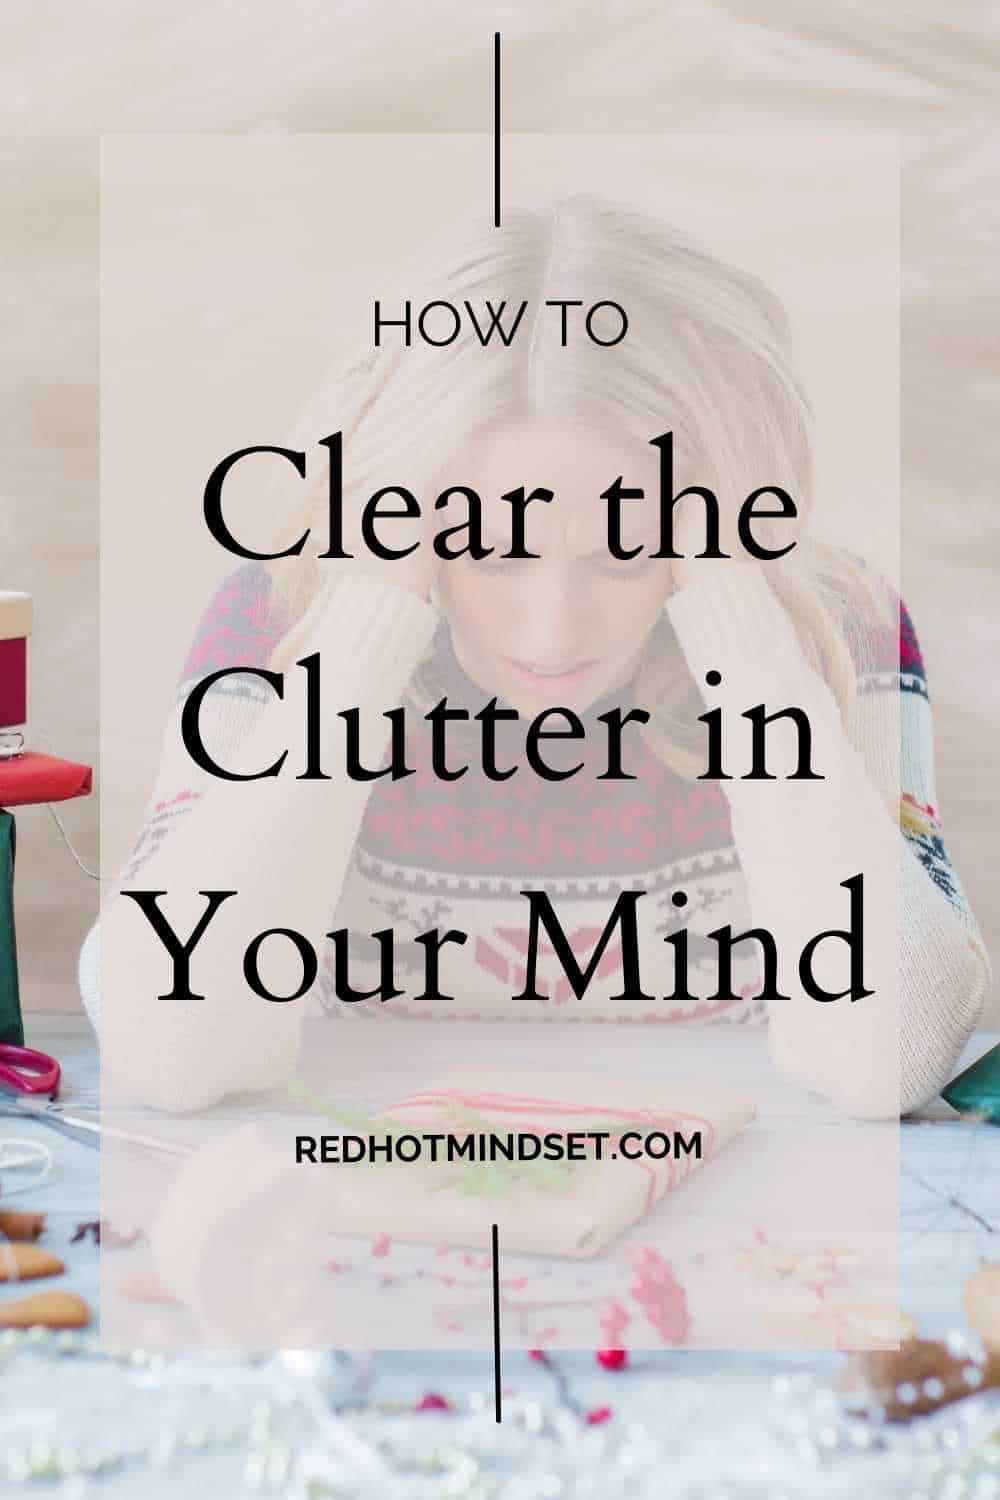 Ep 132 | Clutter vs Clarity – What’s the Difference? 3 Tips to Find Clarity Amid the Clutter